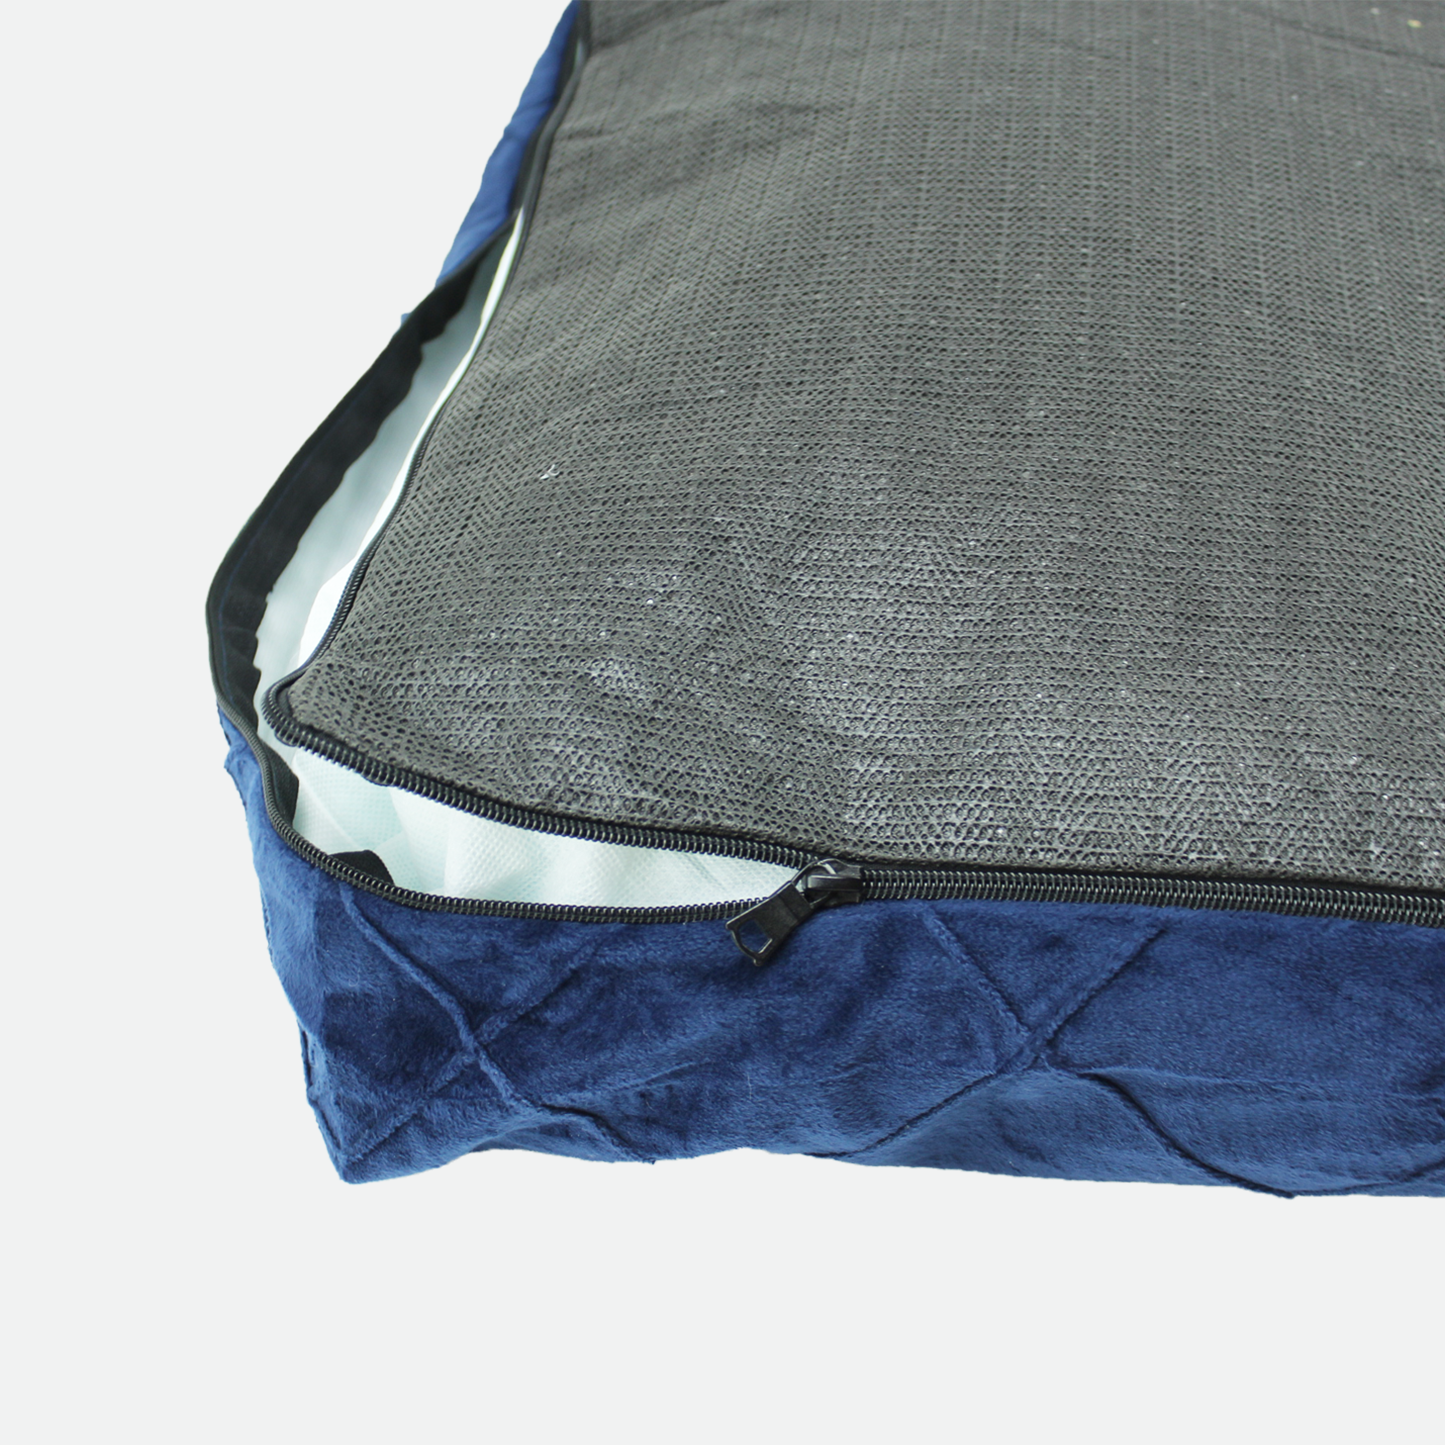 Ultimate savings bundle - Sky bed and spare cover